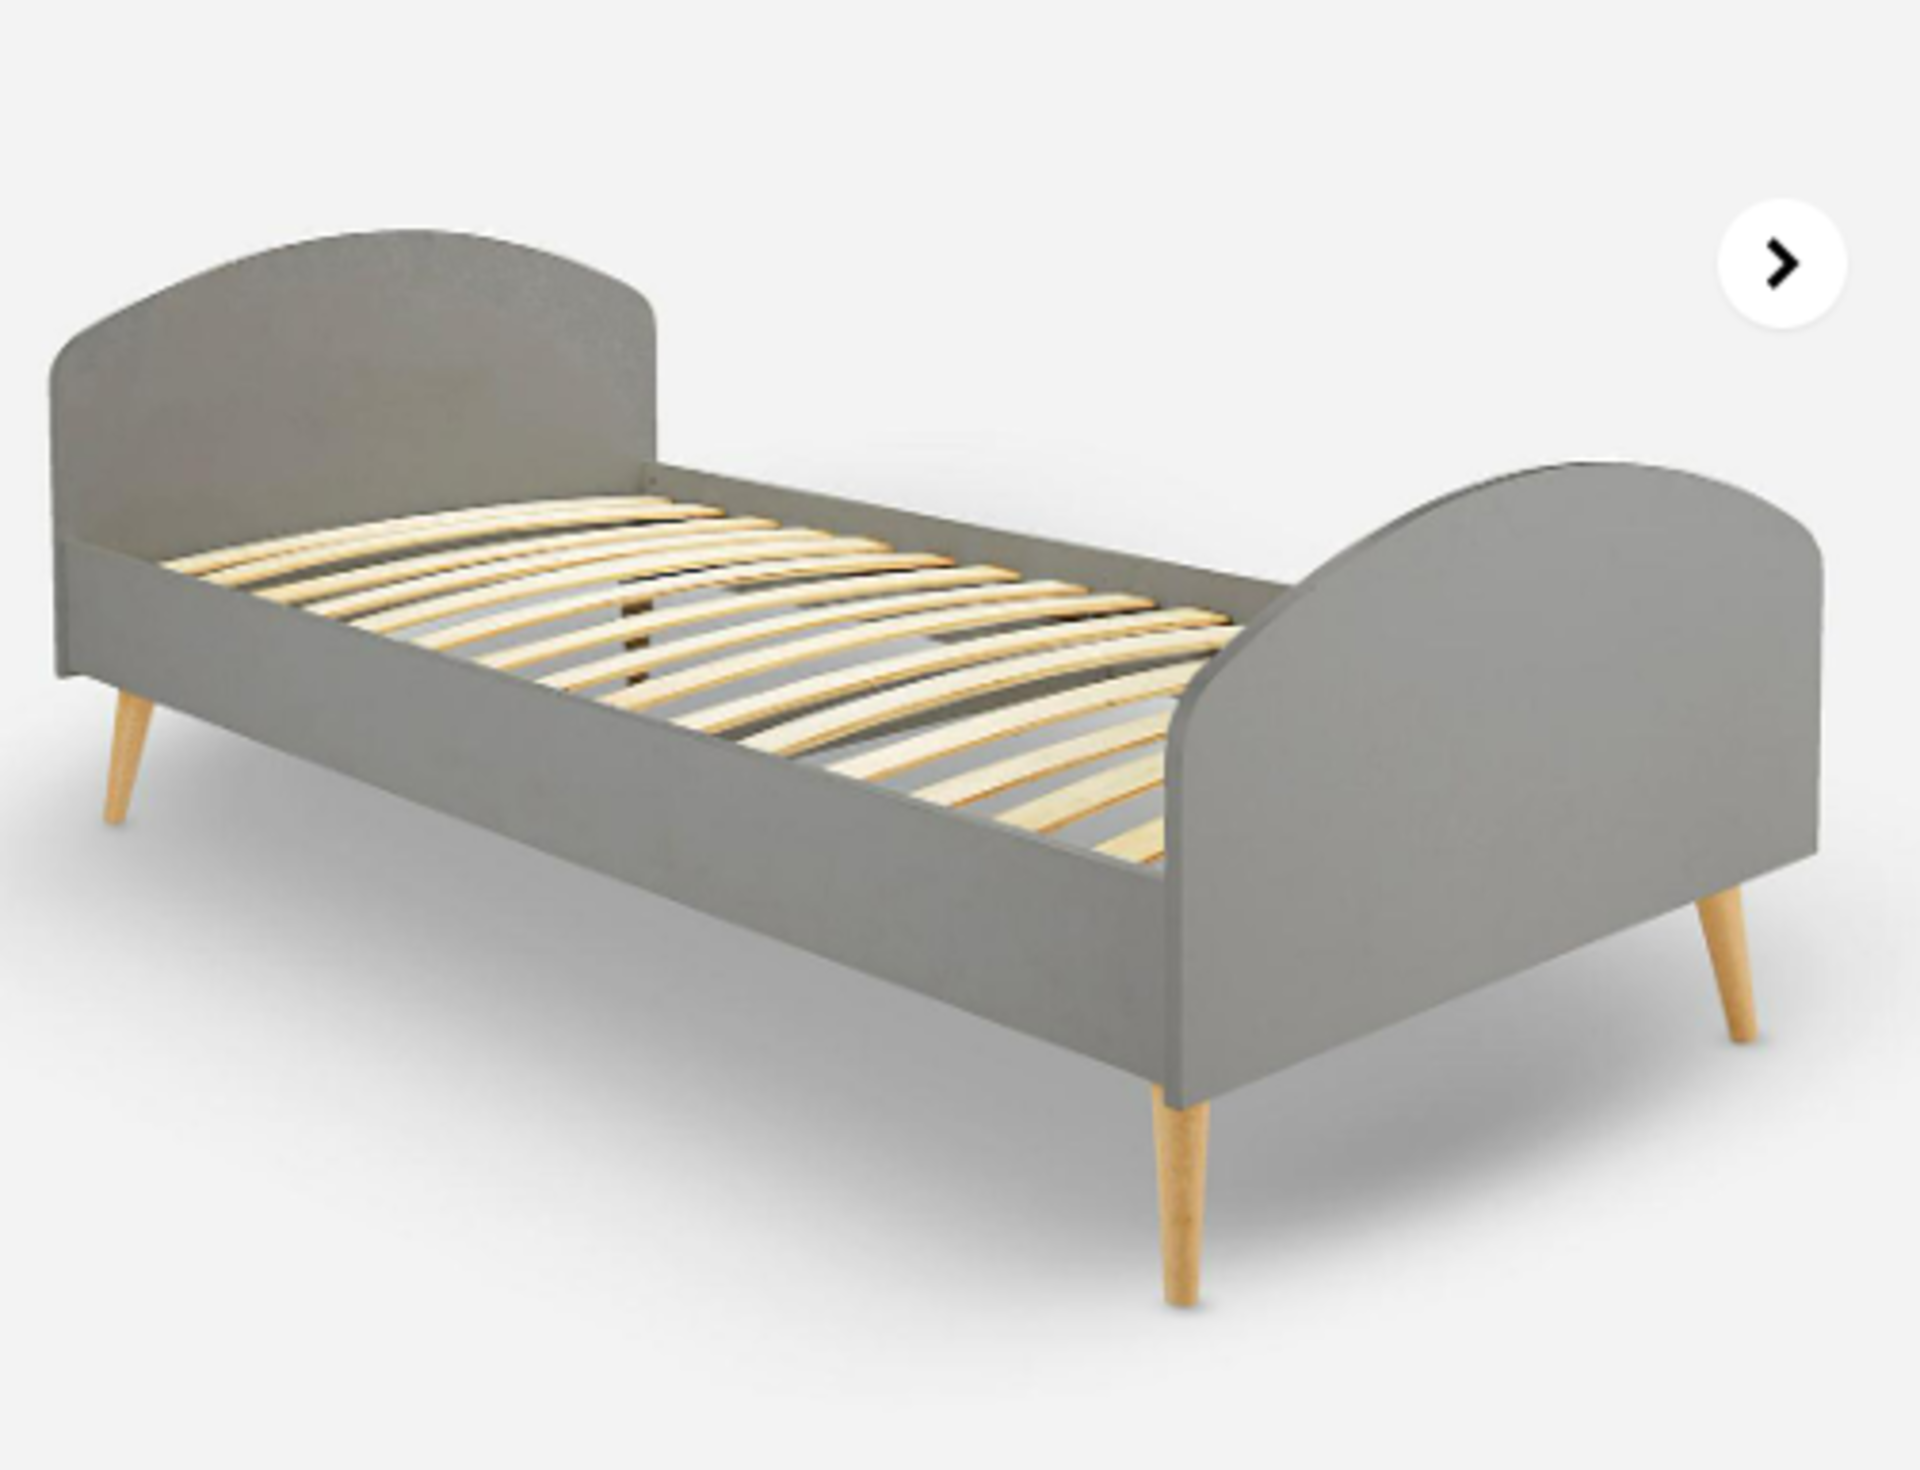 NEW & BOXED Olsen Bed Frames. RRP £399. Stylish as well as practical, the Olsen Bed Frame is perfect - Image 4 of 4